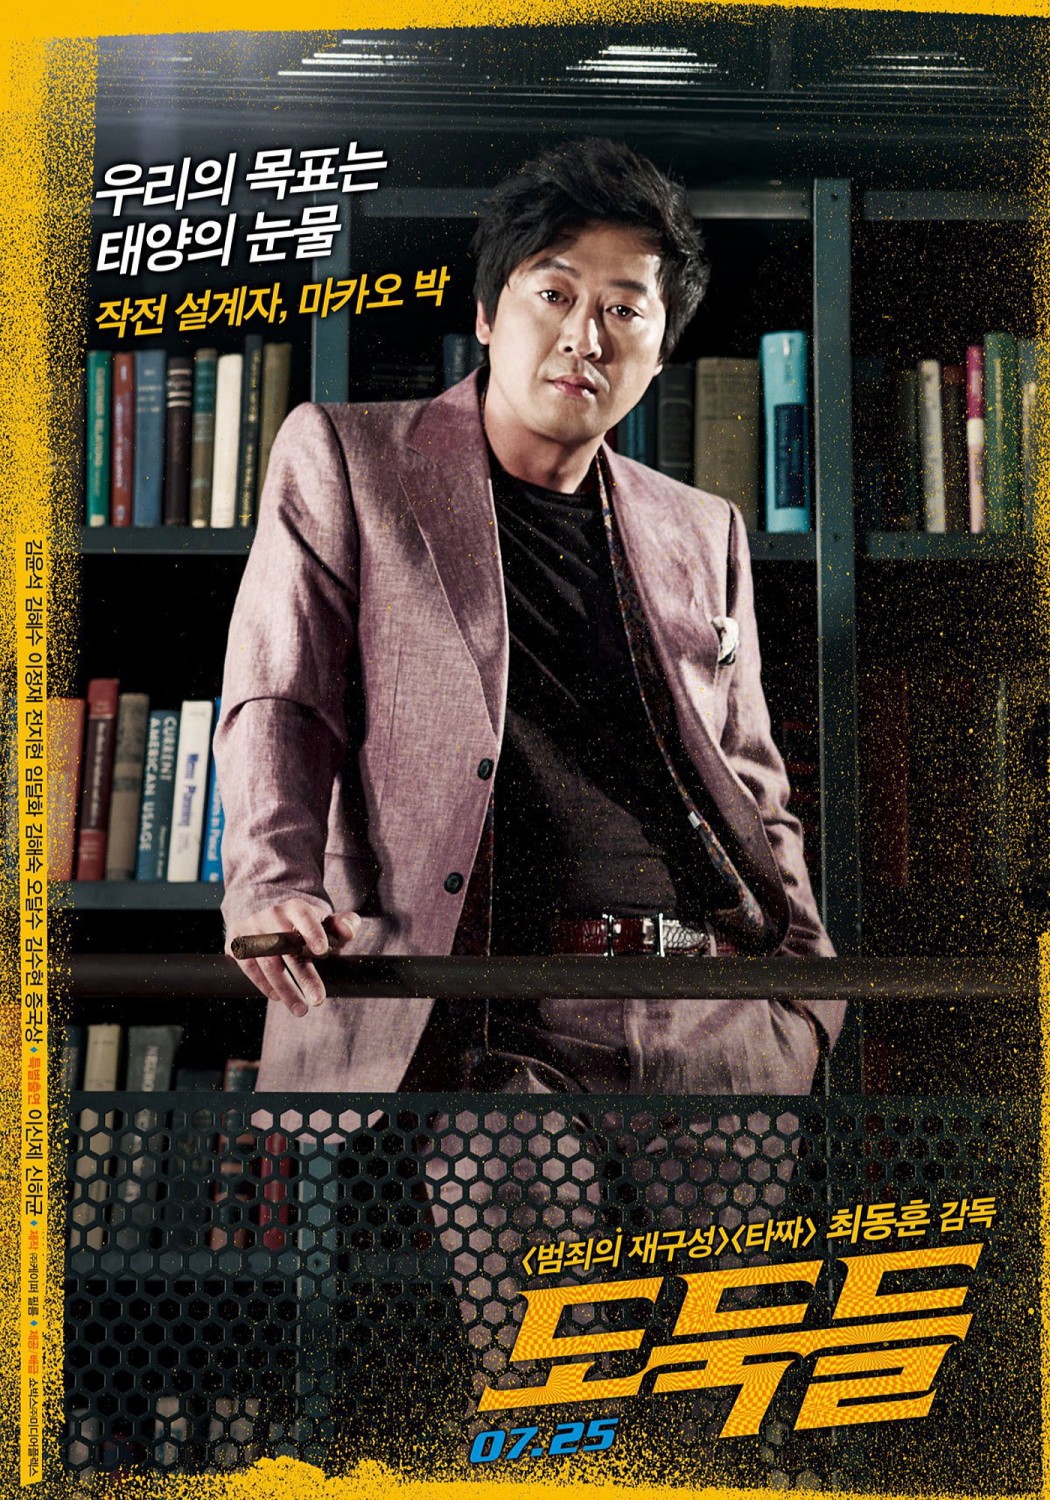 Extra Large Movie Poster Image for Dodookdeul (#5 of 9)